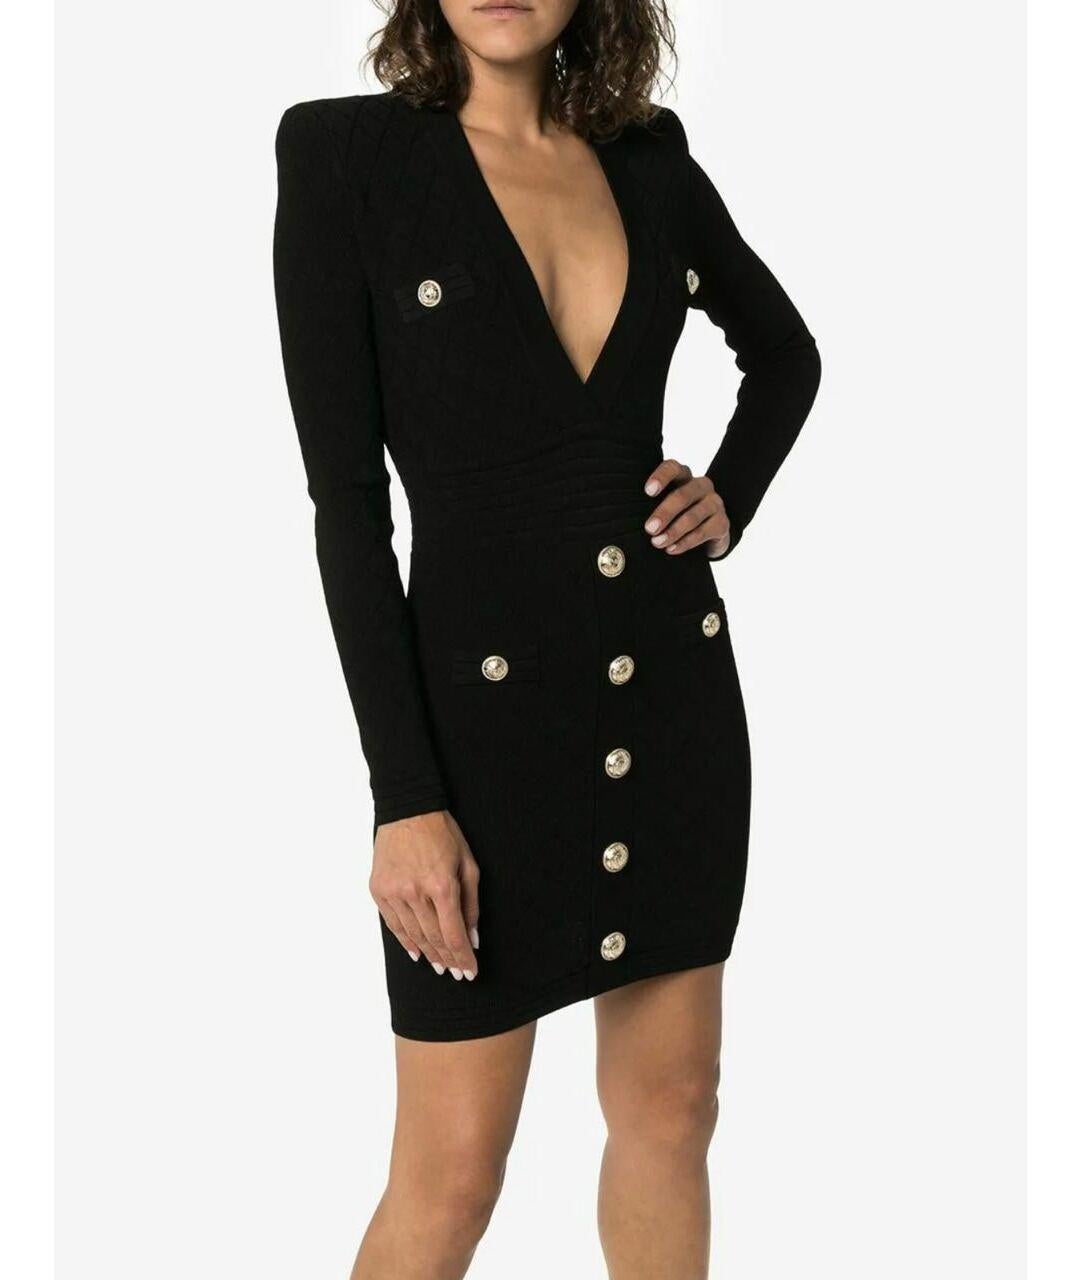 BALMAIN


Black viscose dress

Back zip closure 

Long sleeves

Balmain signature buttons

Size 38 or US 6



Made in Portugal

Pre-owned. Great condition. 

 100% authentic guarantee 

       PLEASE VISIT OUR STORE FOR MORE GREAT ITEMS 